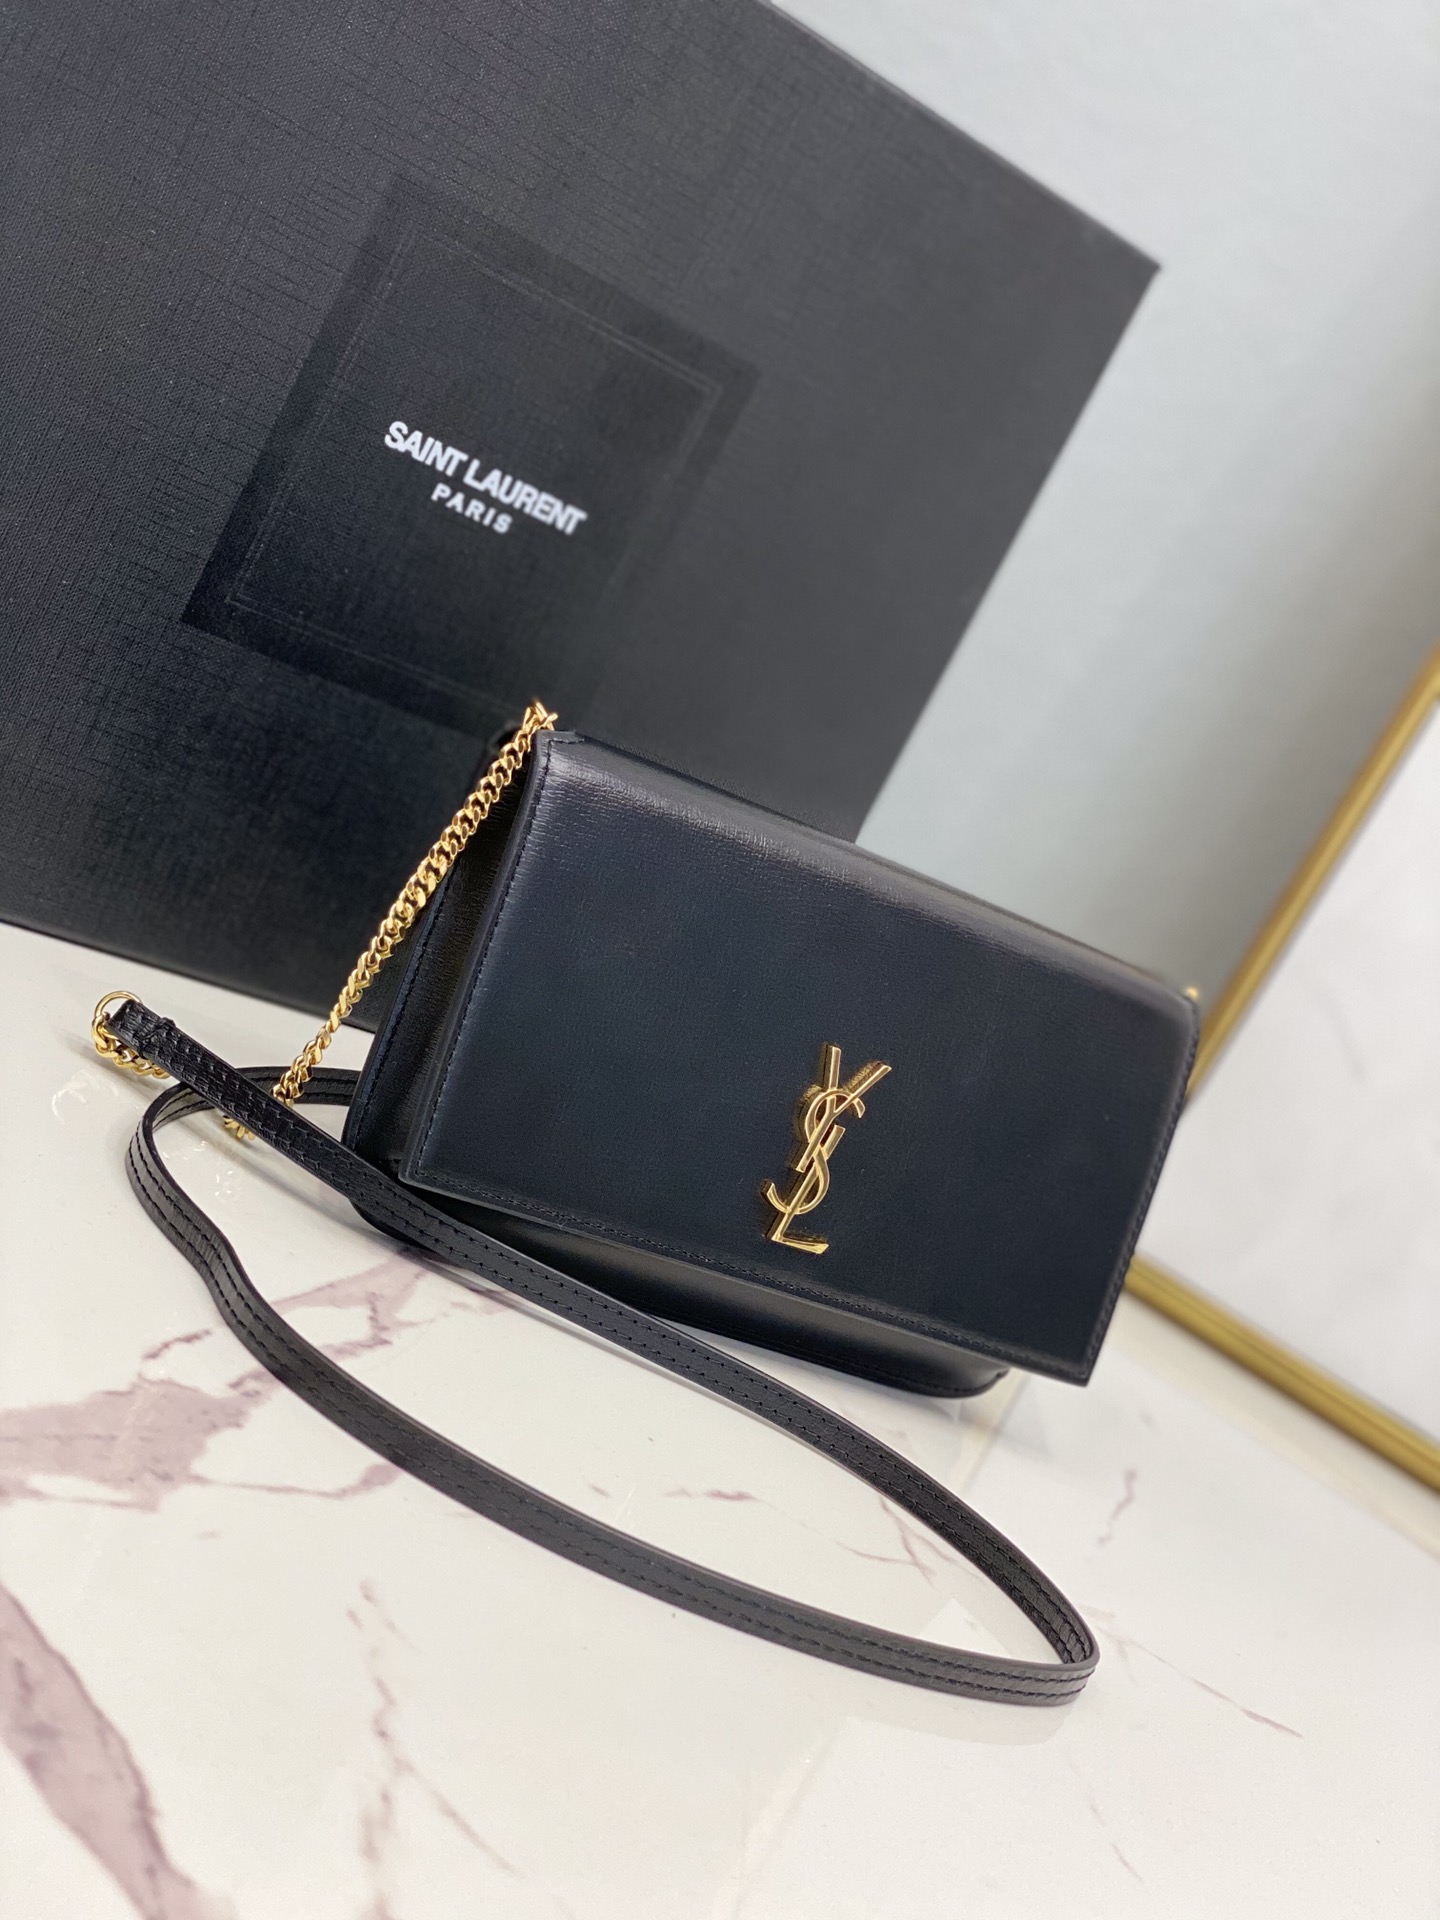 2020 cheap Saint Laurent monogram phone holder with strap in black smooth leather